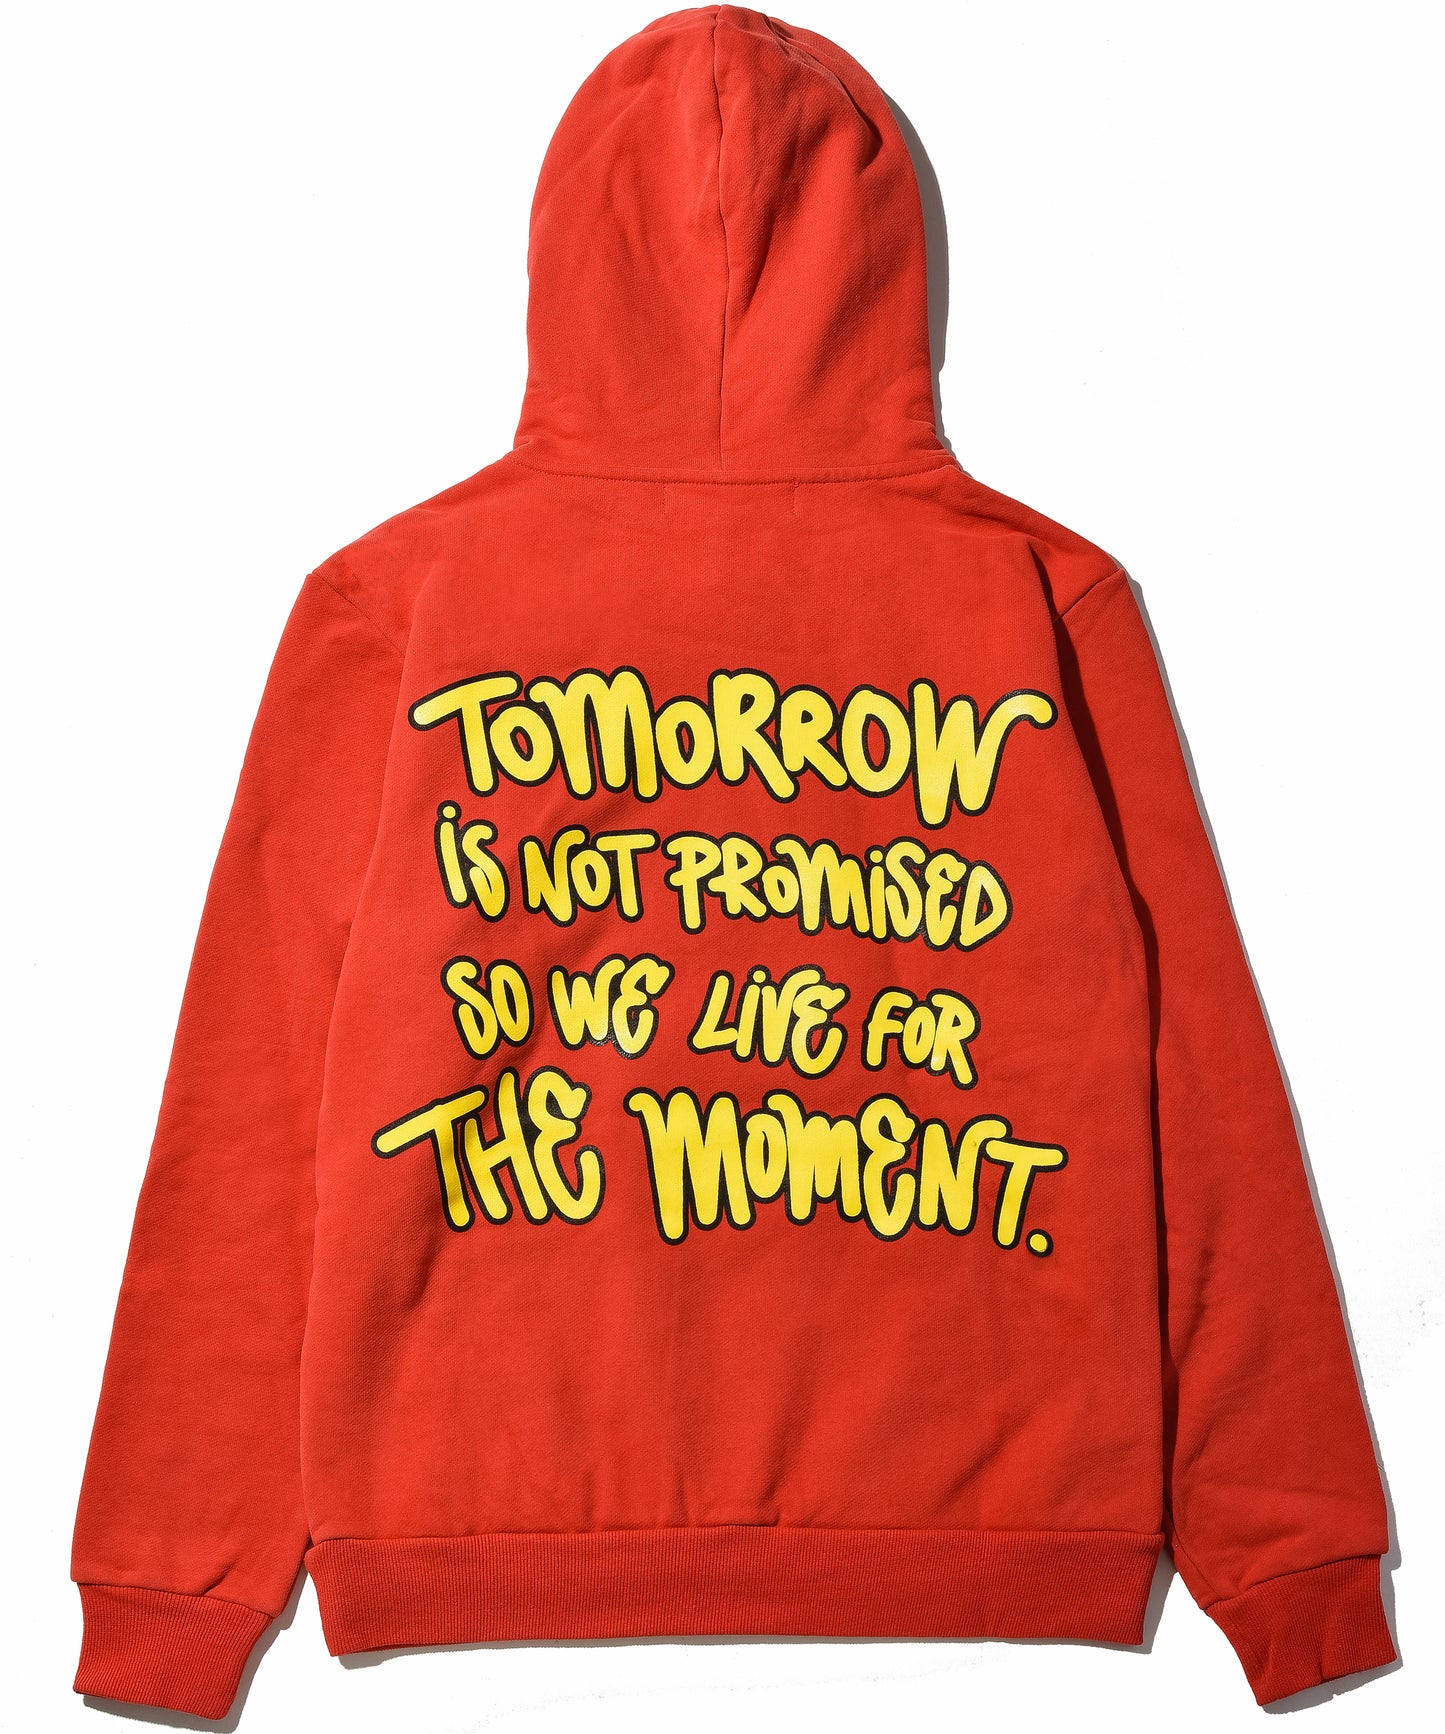 We Live For The Moment Hoodie - Red